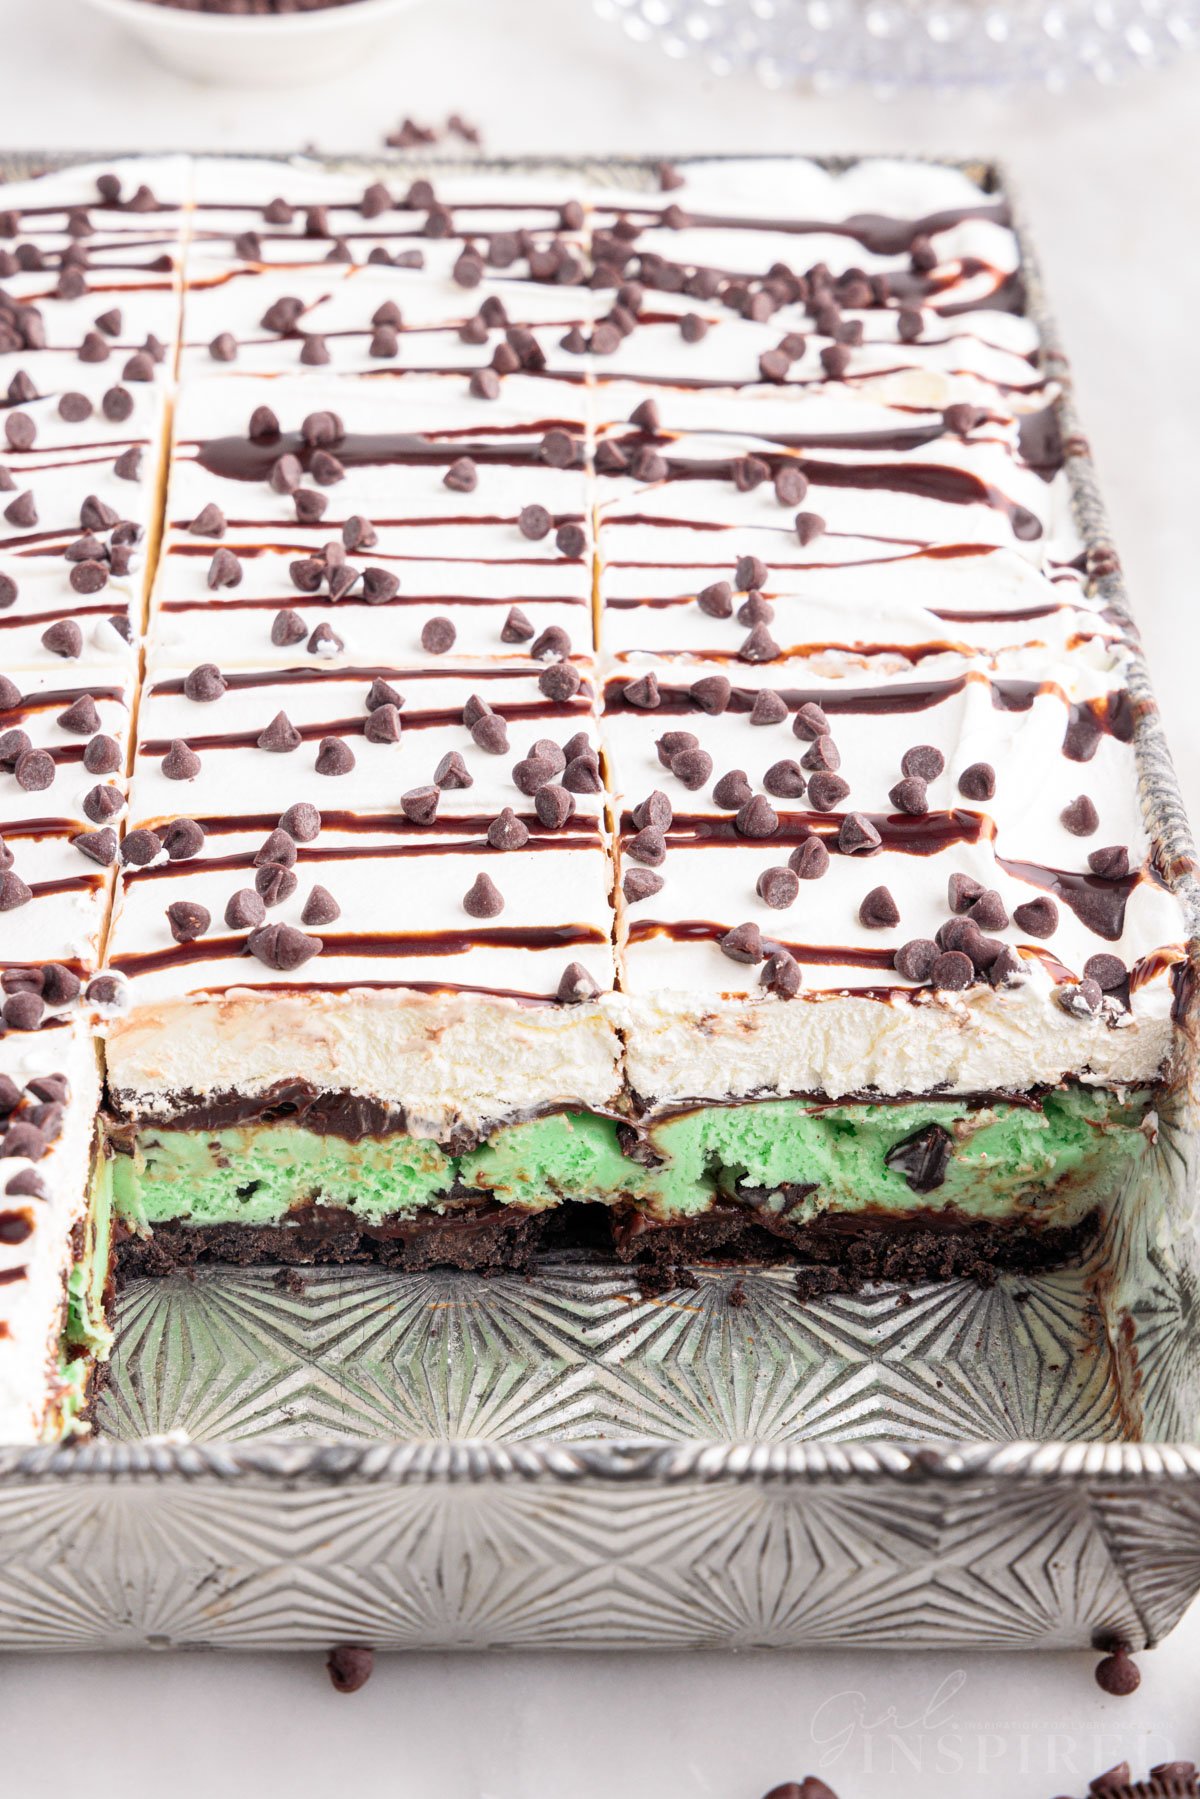 Mint ice cream cake in metal pan with several slices removed revealing the layered dessert.